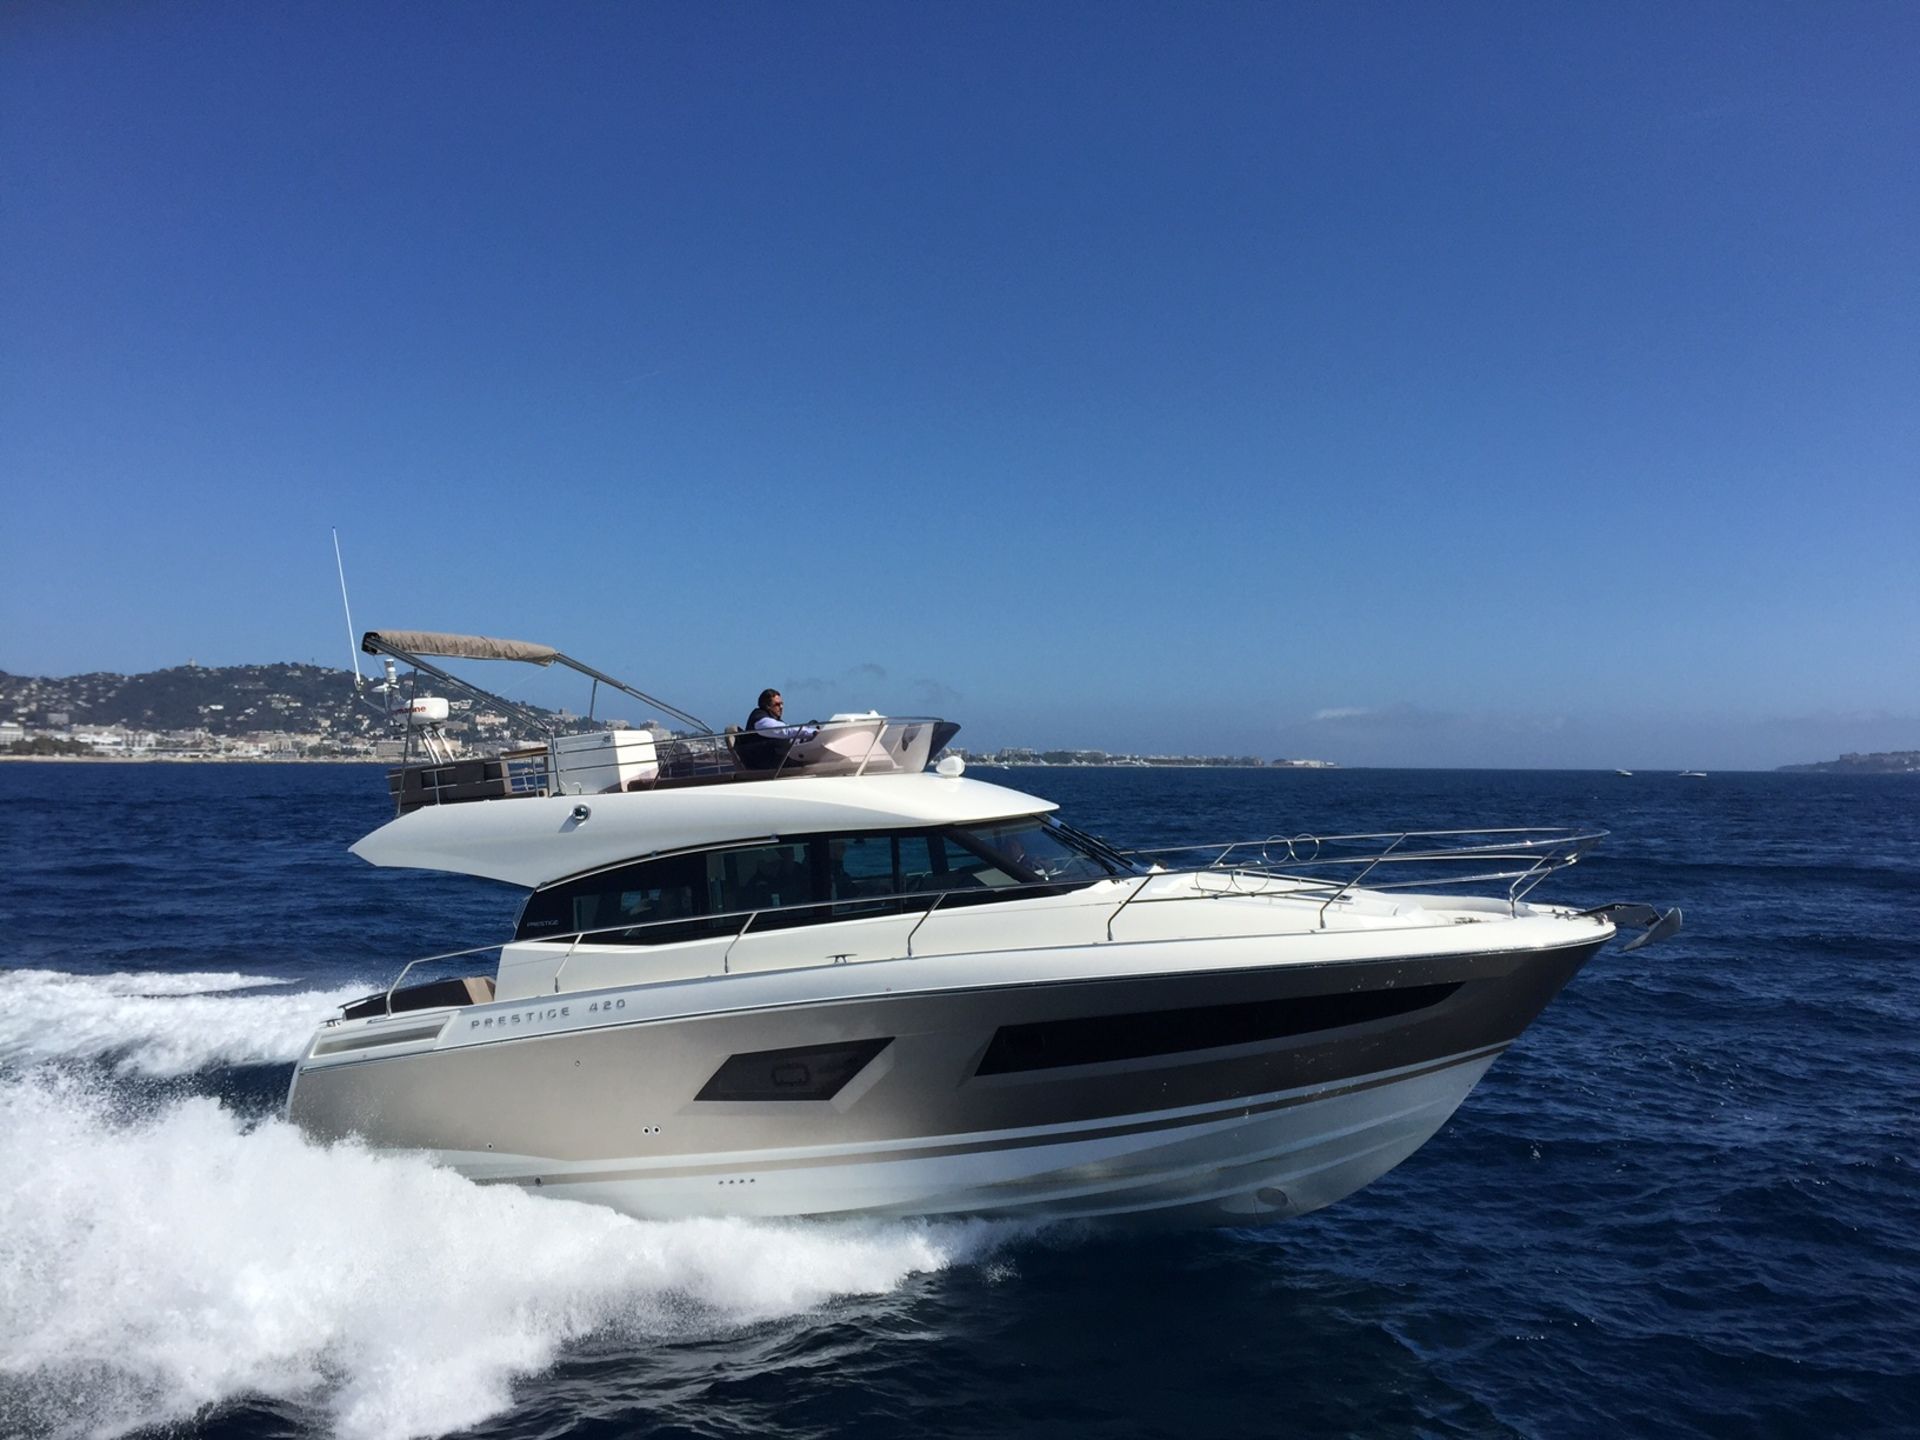 exclusive sea trial days - cannes 2015